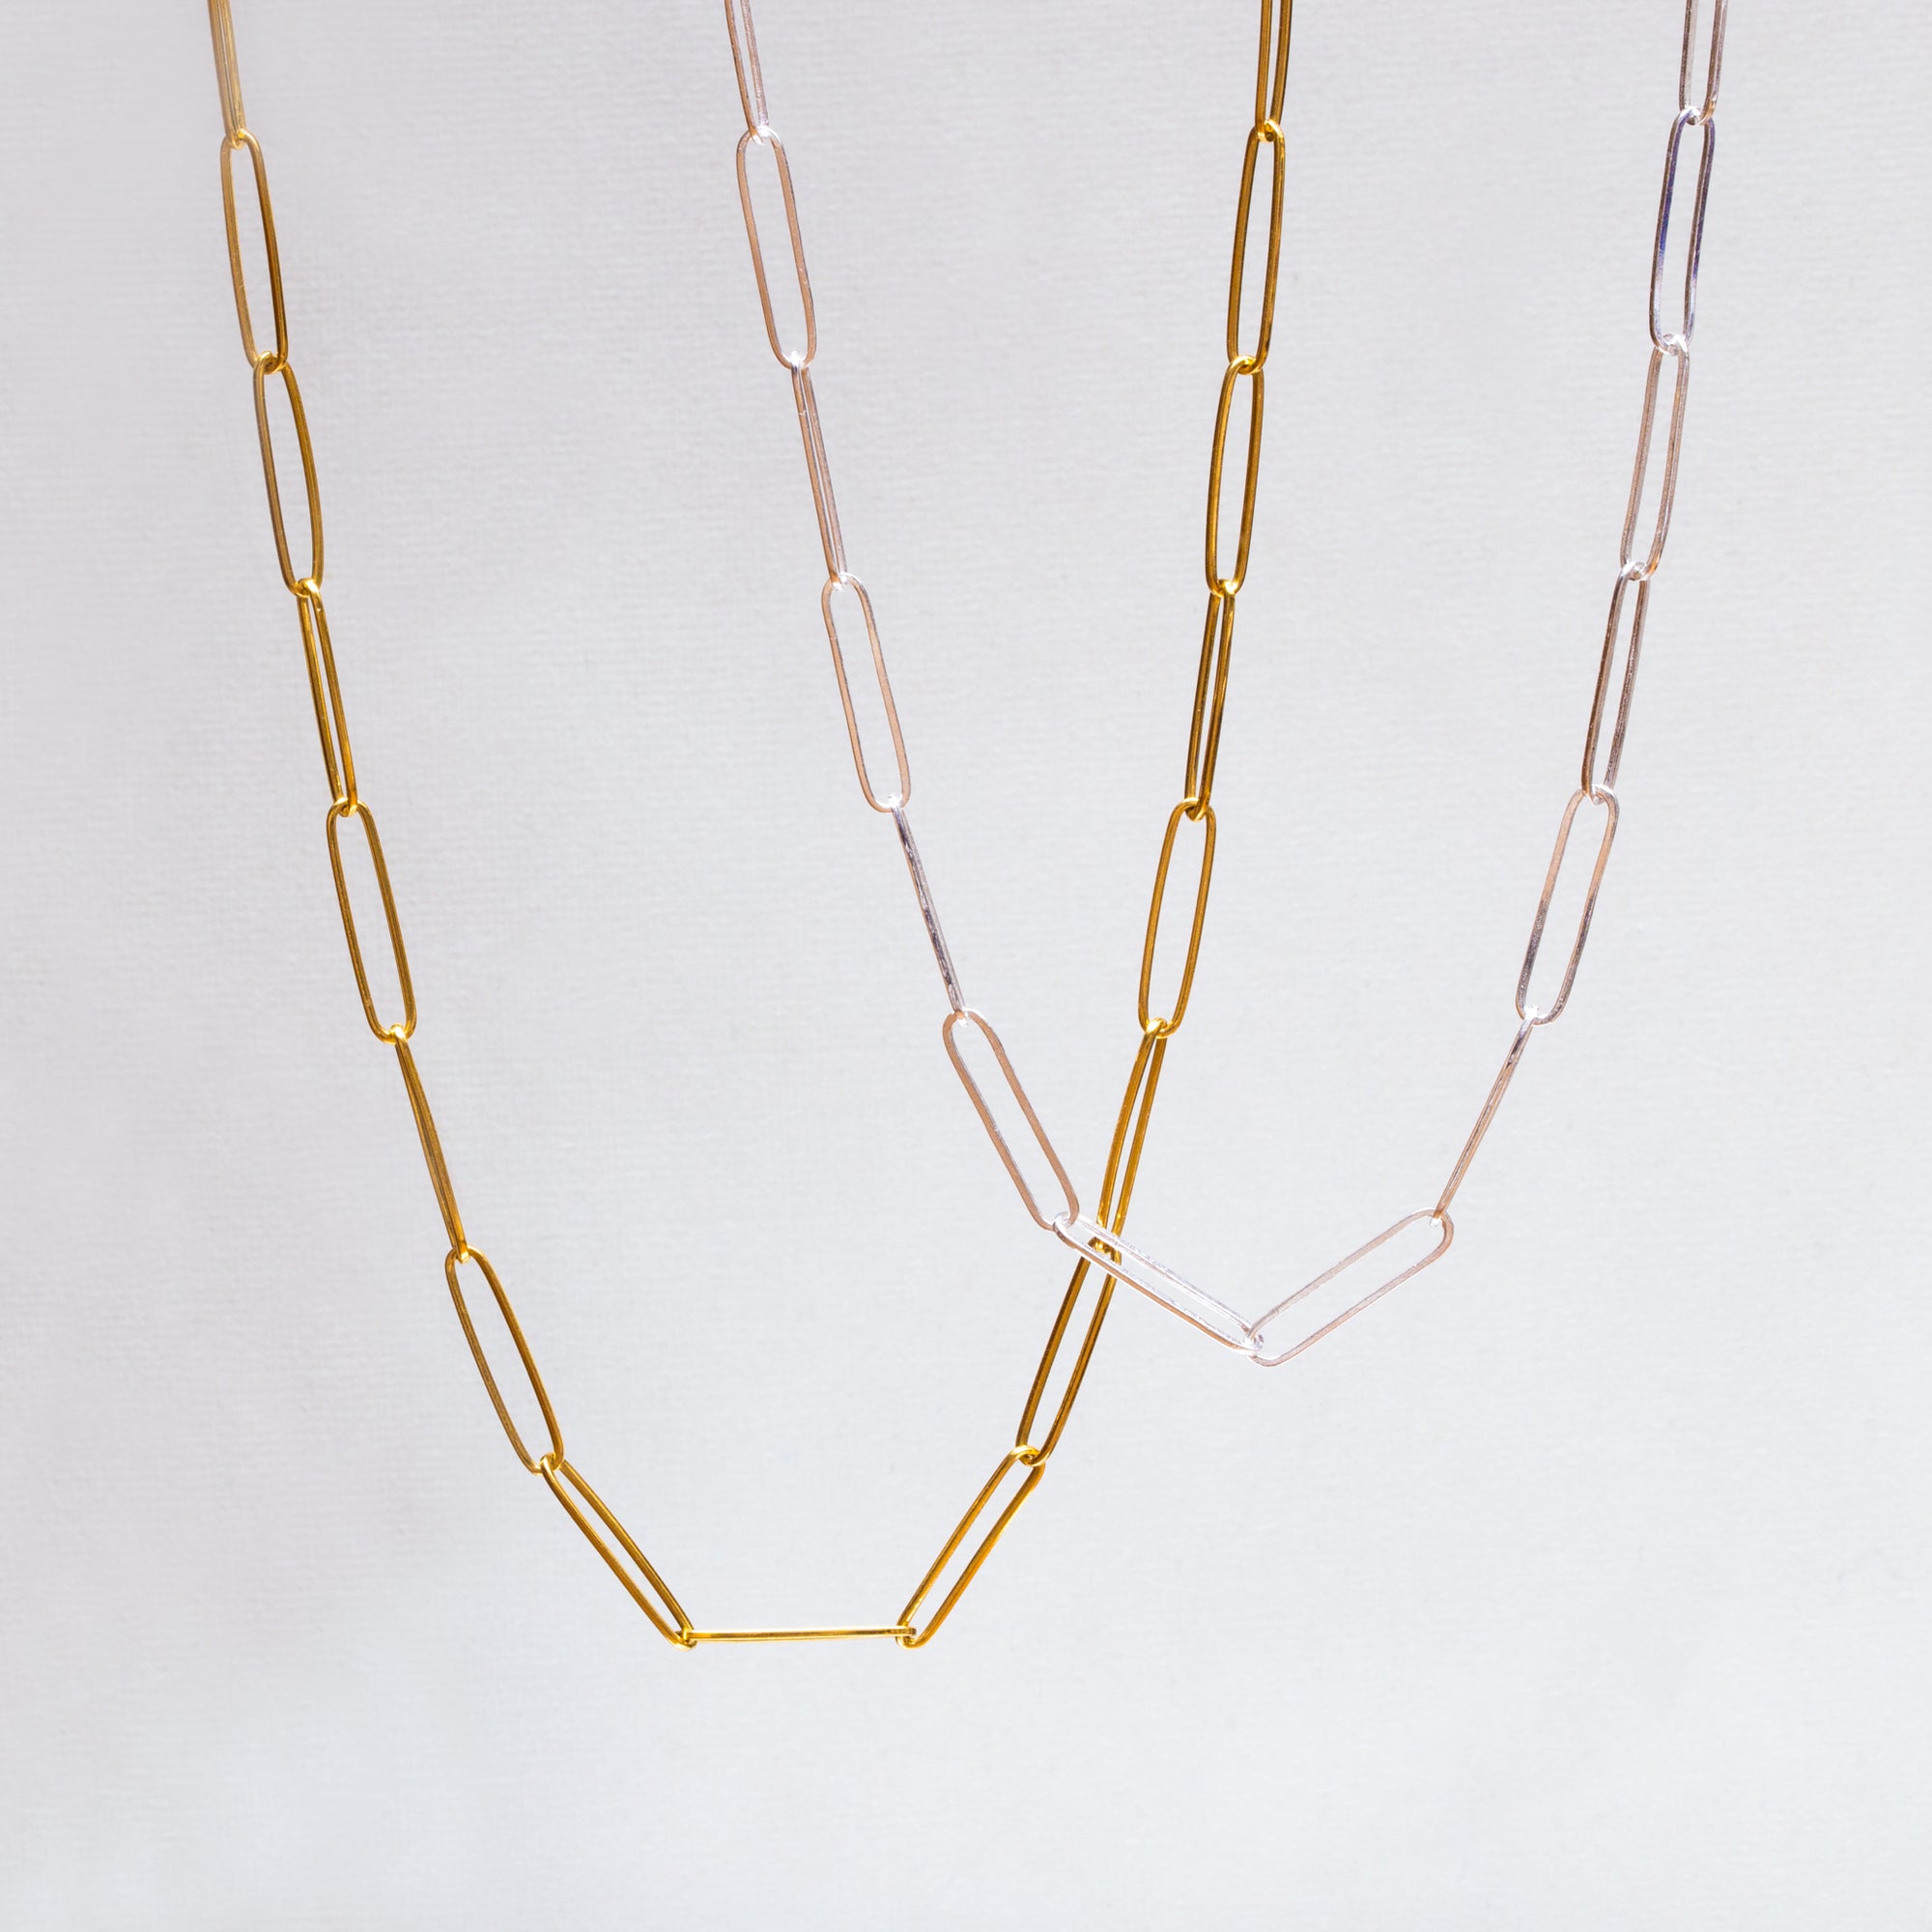 Gold and Silver Paperclip Chain Necklace #1